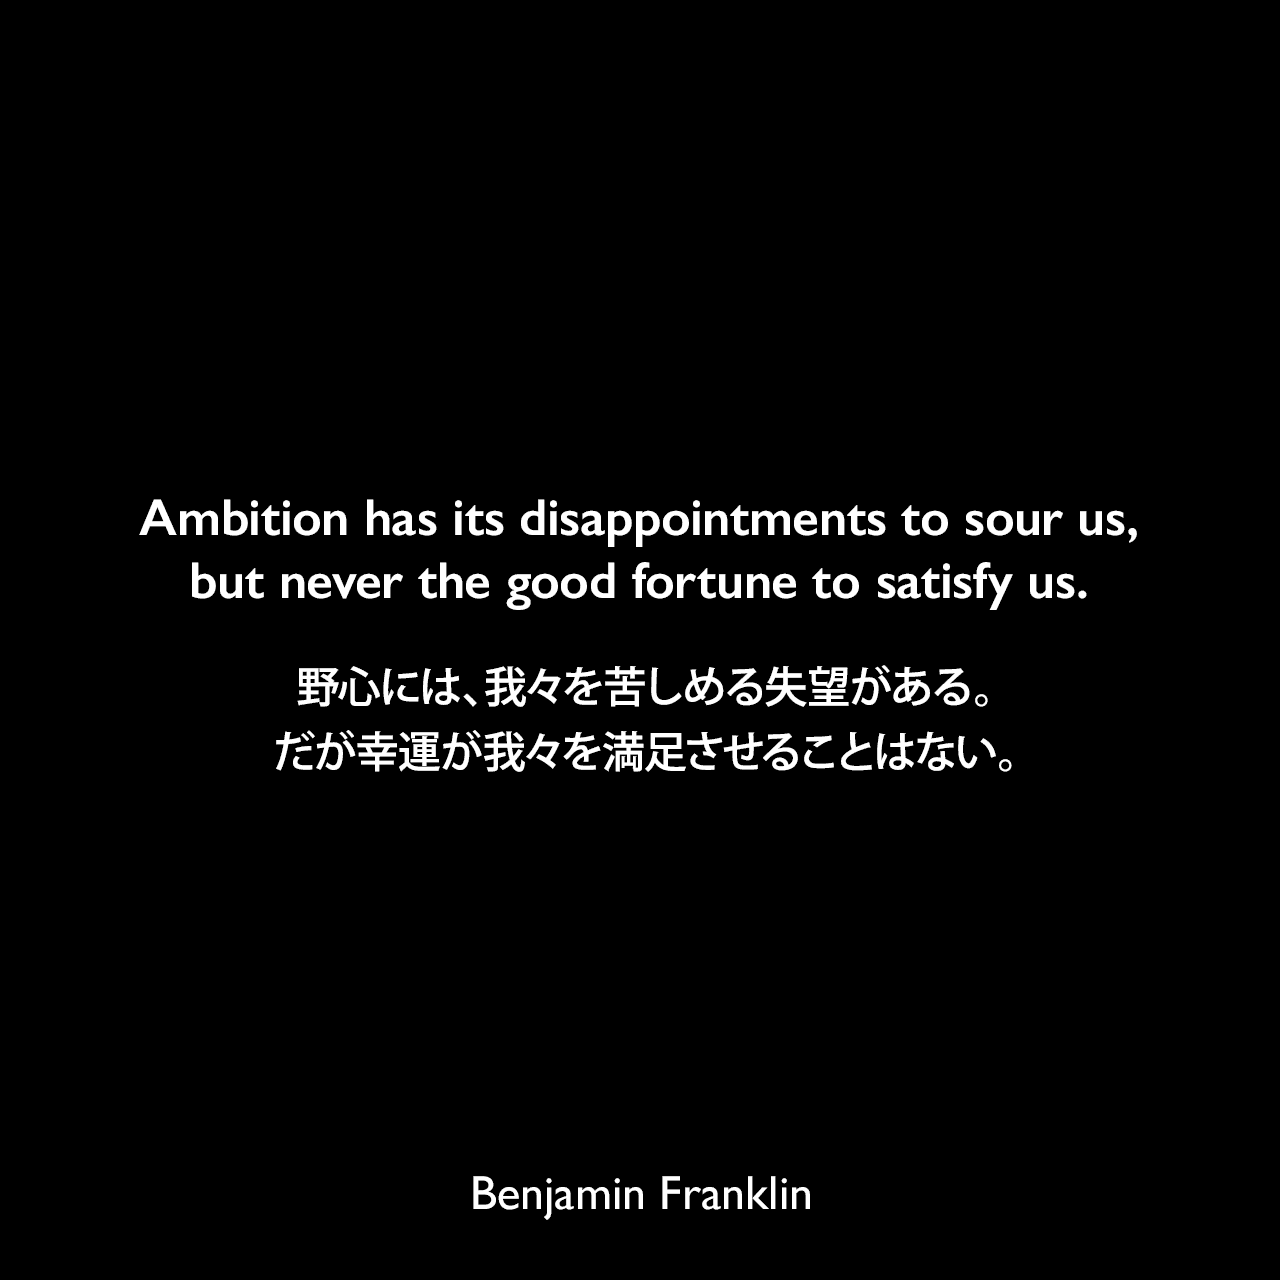 Ambition has its disappointments to sour us, but never the good fortune to satisfy us.野心には、我々を苦しめる失望がある。だが幸運が我々を満足させることはない。- 1735年のペンシルヴェニア官報「On True Happiness」よりBenjamin Franklin